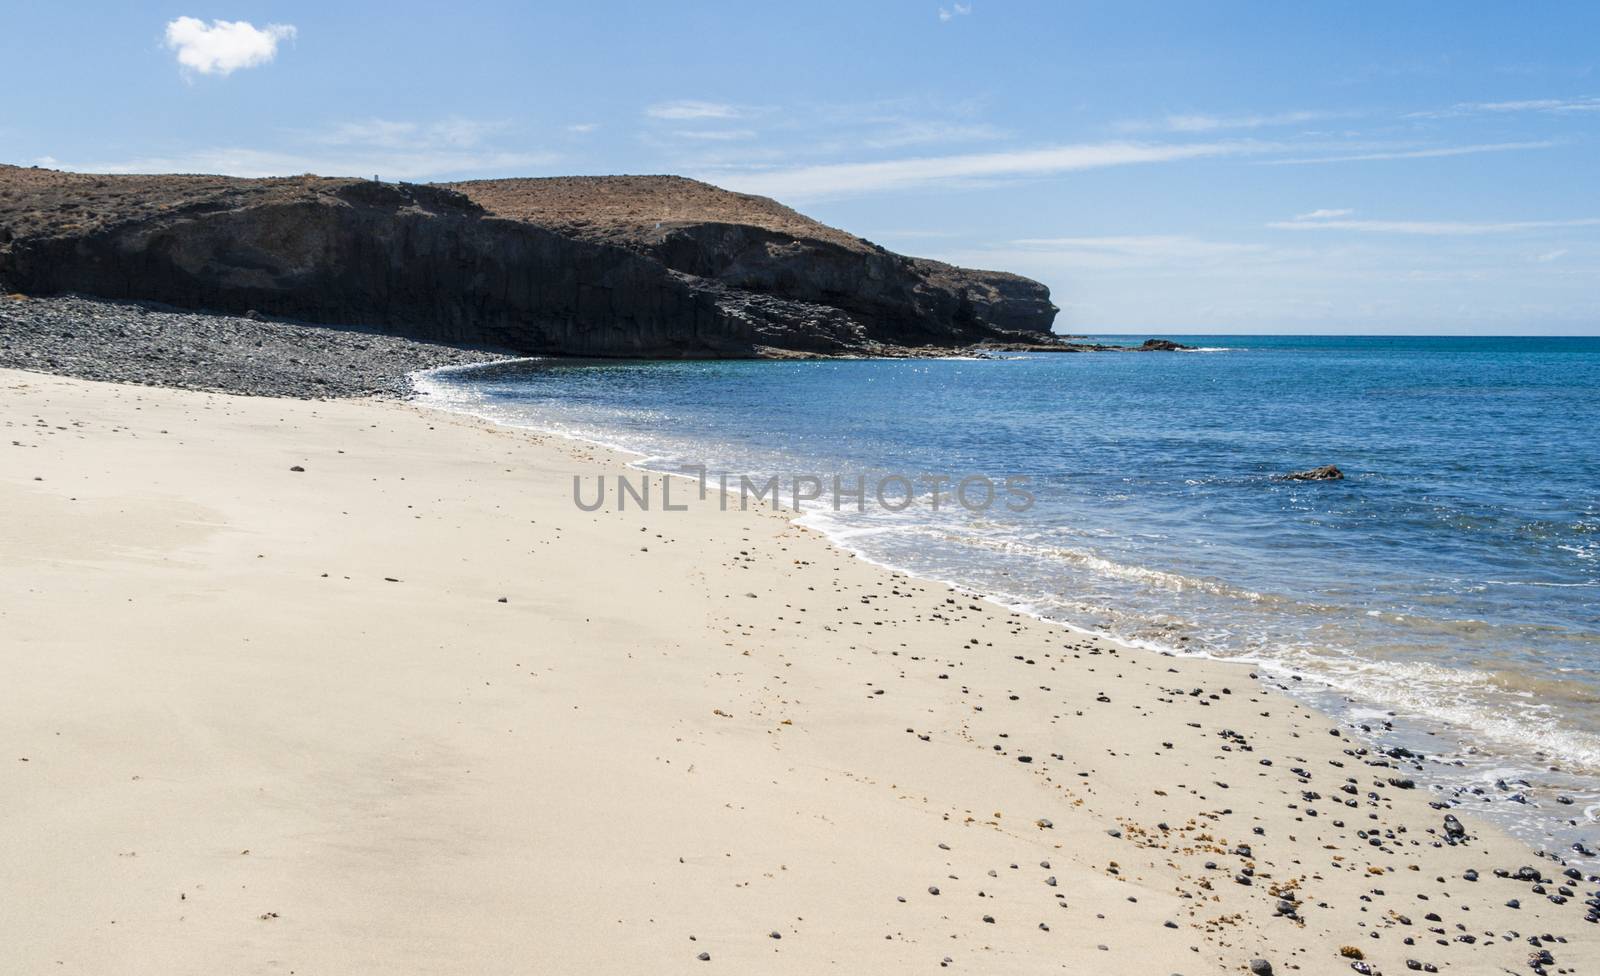 Lonely beach in Fuerteventura island. Dark stones and seaweed on it. Blue sky and a dark cliff on the background